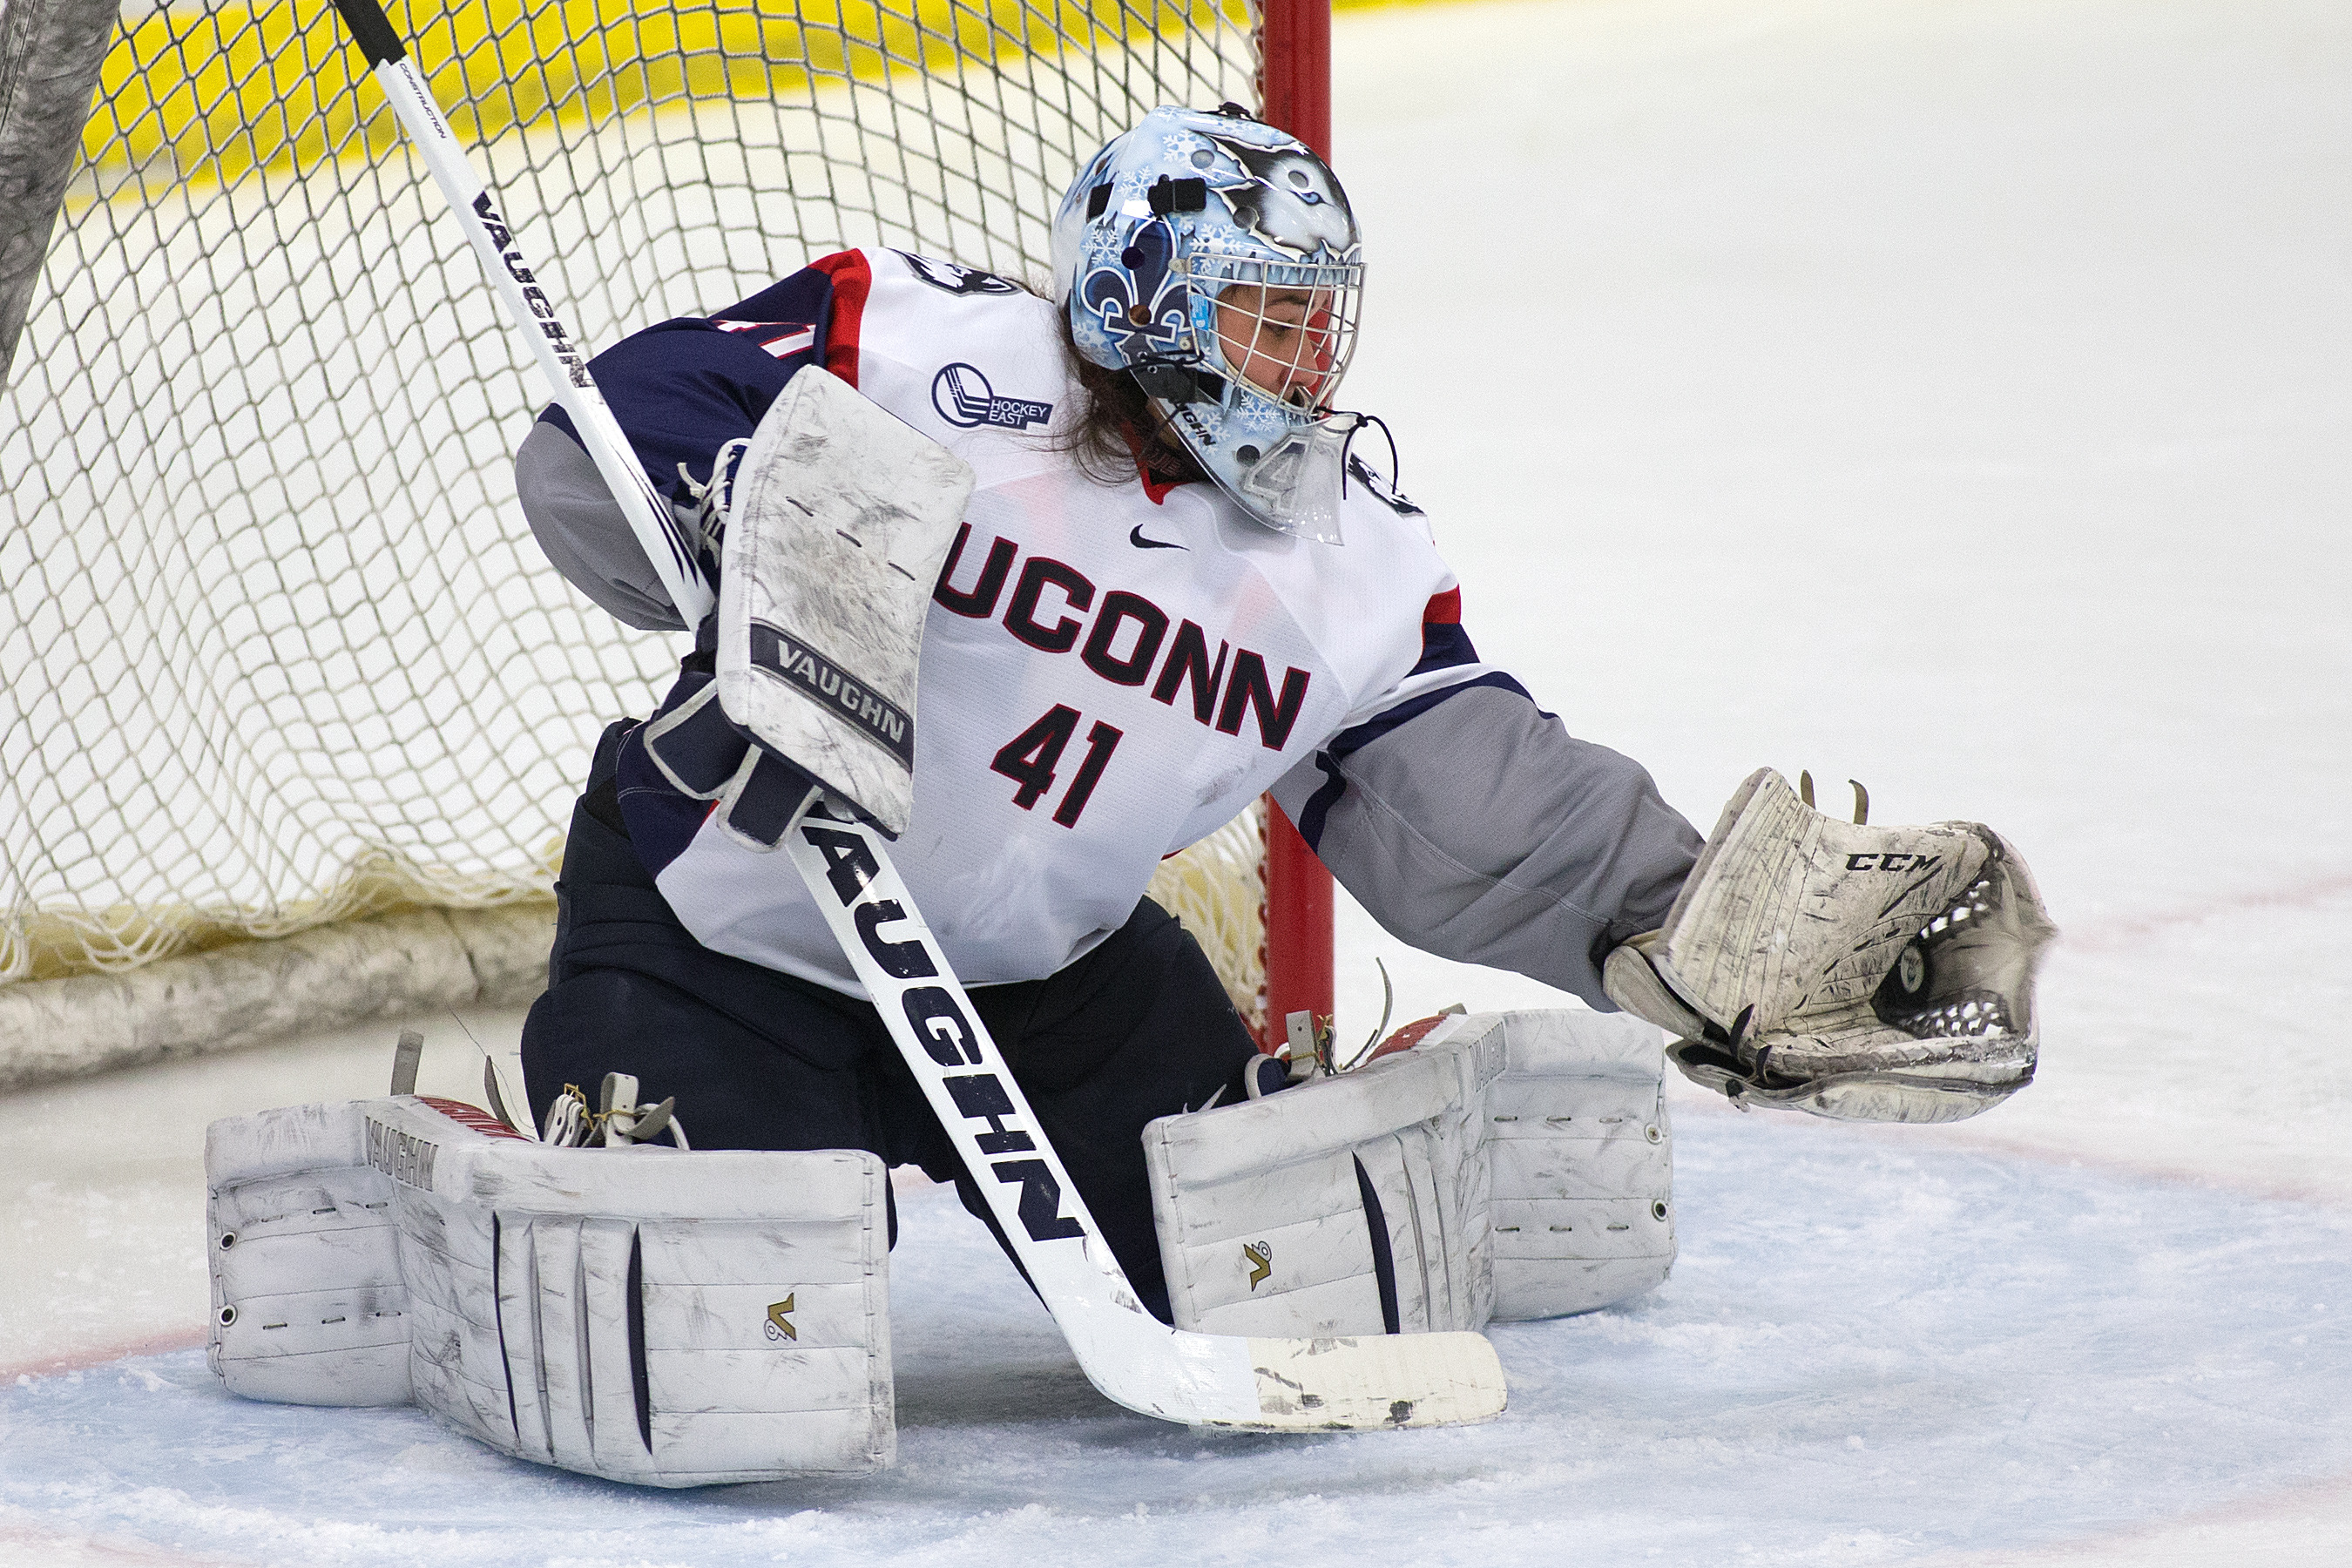 Two-time honoree Annie Belanger was among a select group to earn recognition as one of Hockey East’s Top Scholar Athlete by boasting a 4.0 GPA for the season. (Athletic Communications/UConn Photo)